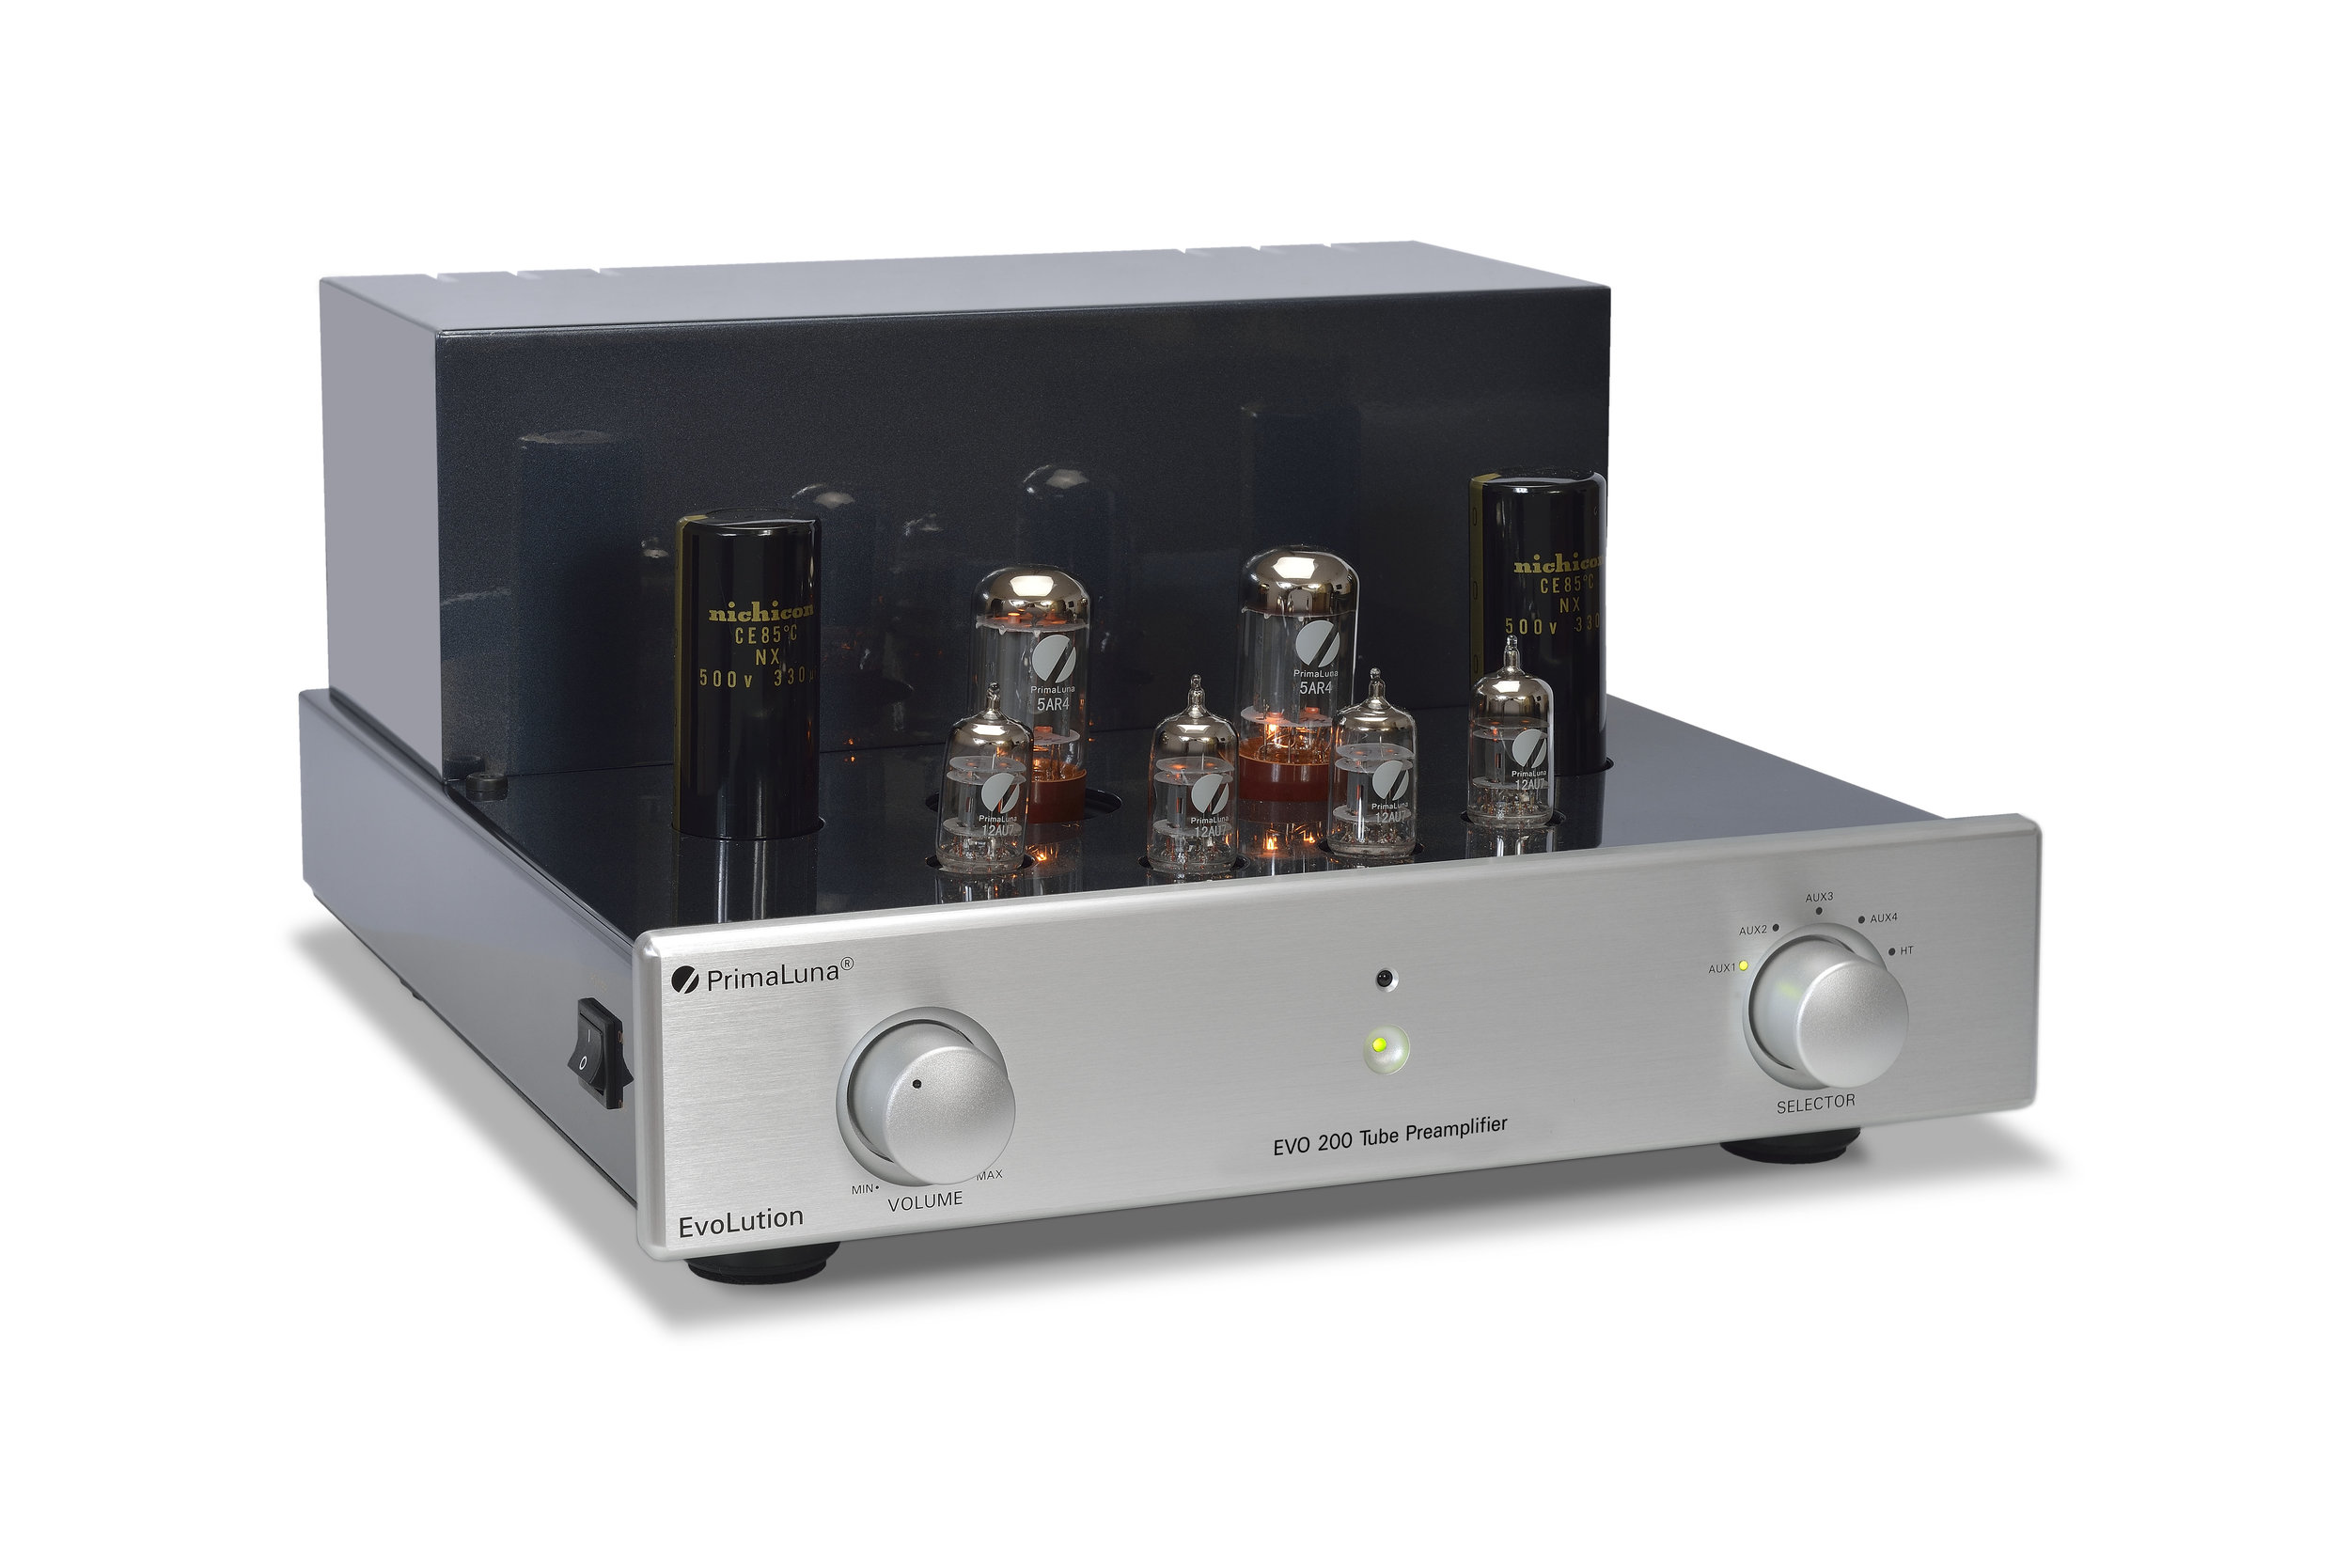 084b - PrimaLuna Evo 200 Tube Preamplifier - silver - slanted - without cage - white background.jpg